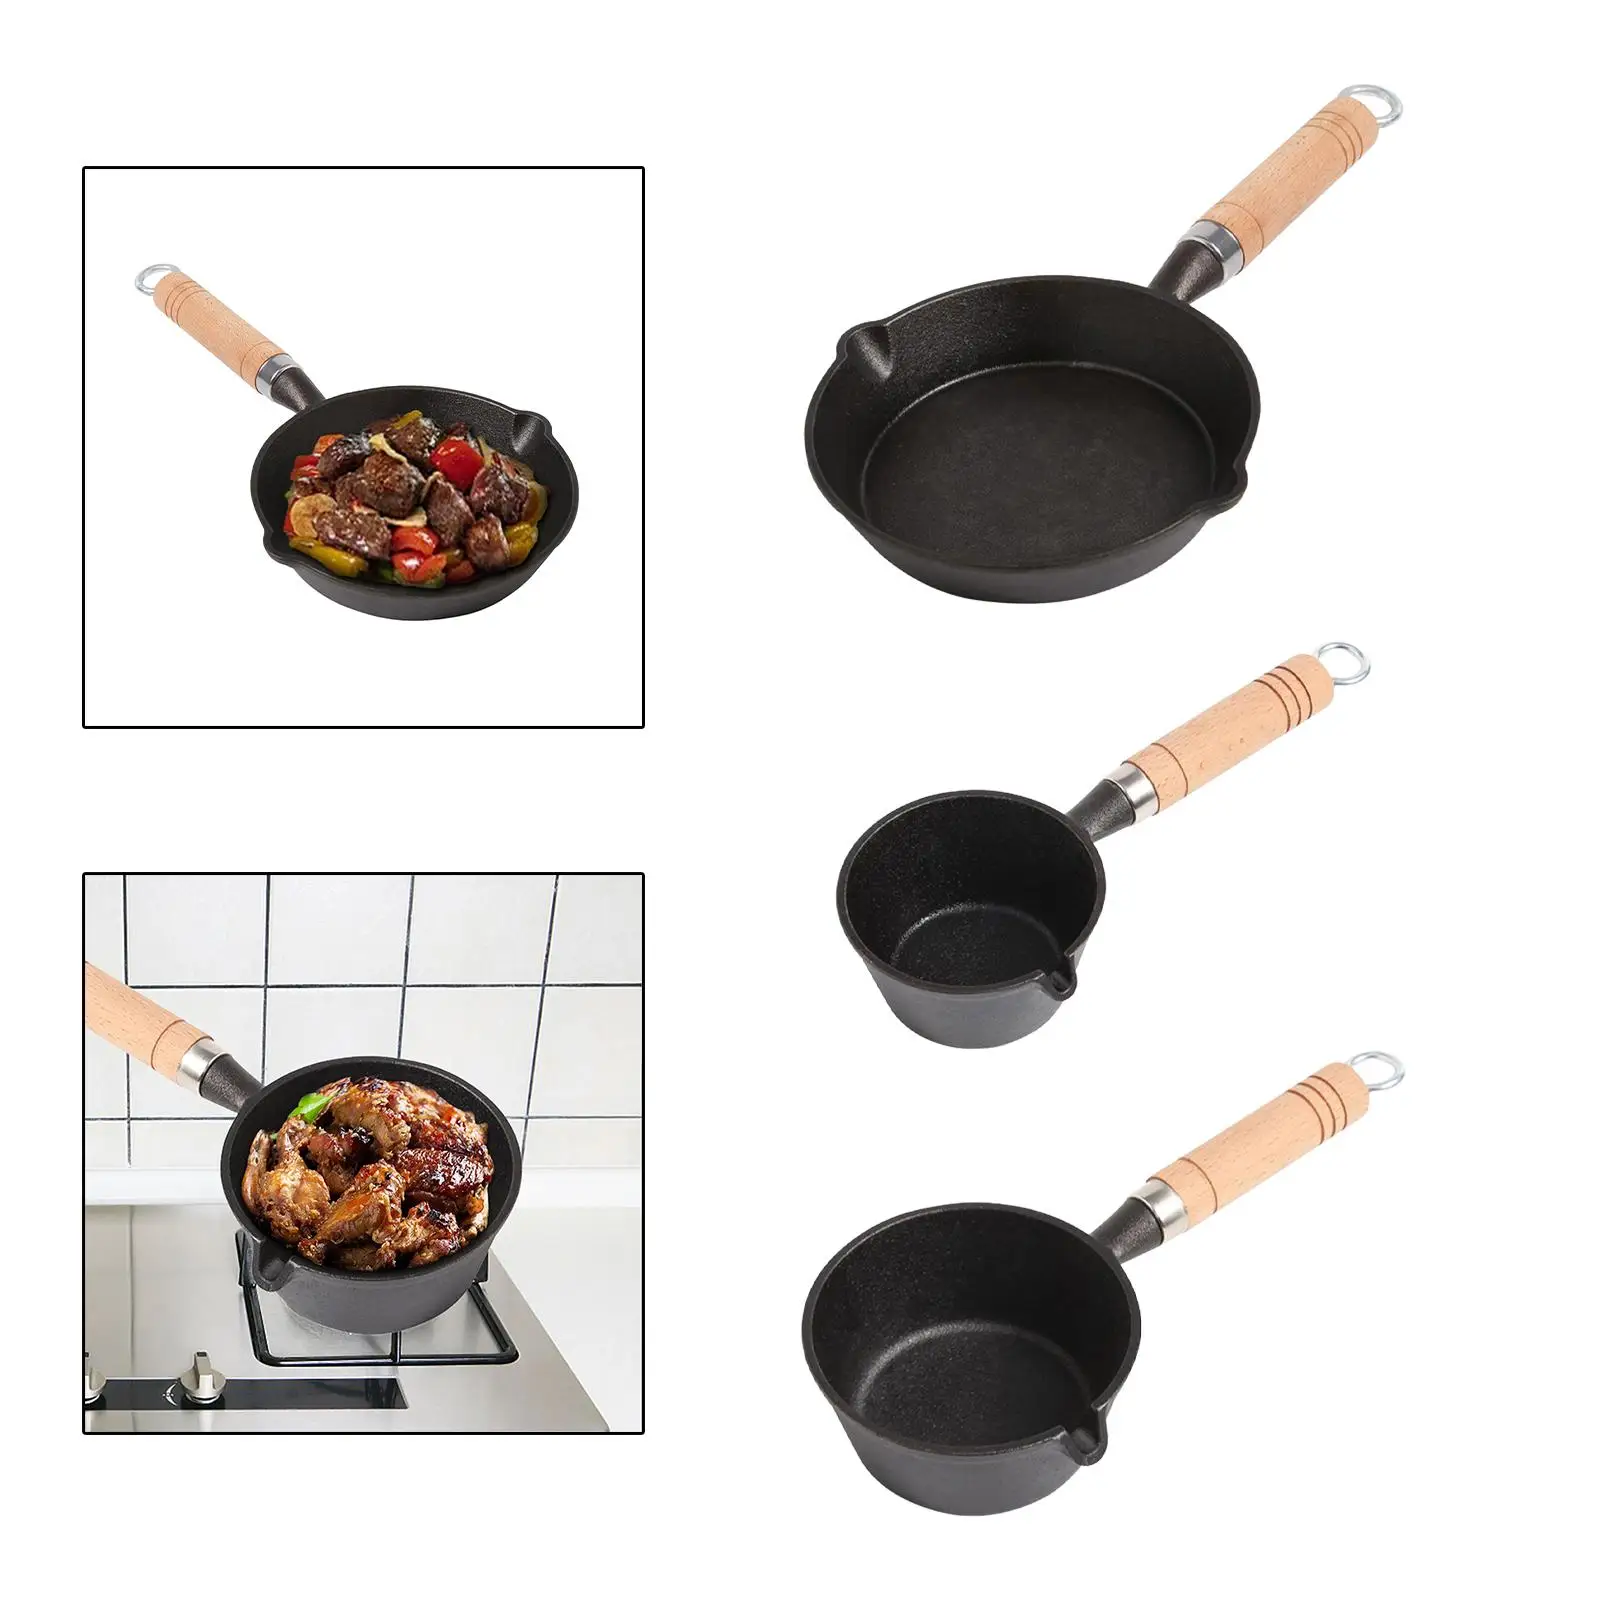 Mini Cast Iron Skillet Pan Small Omelette Pan Cooking Pan Portable Black Durable Double Sided Pouring Spout Design Wooden Handle